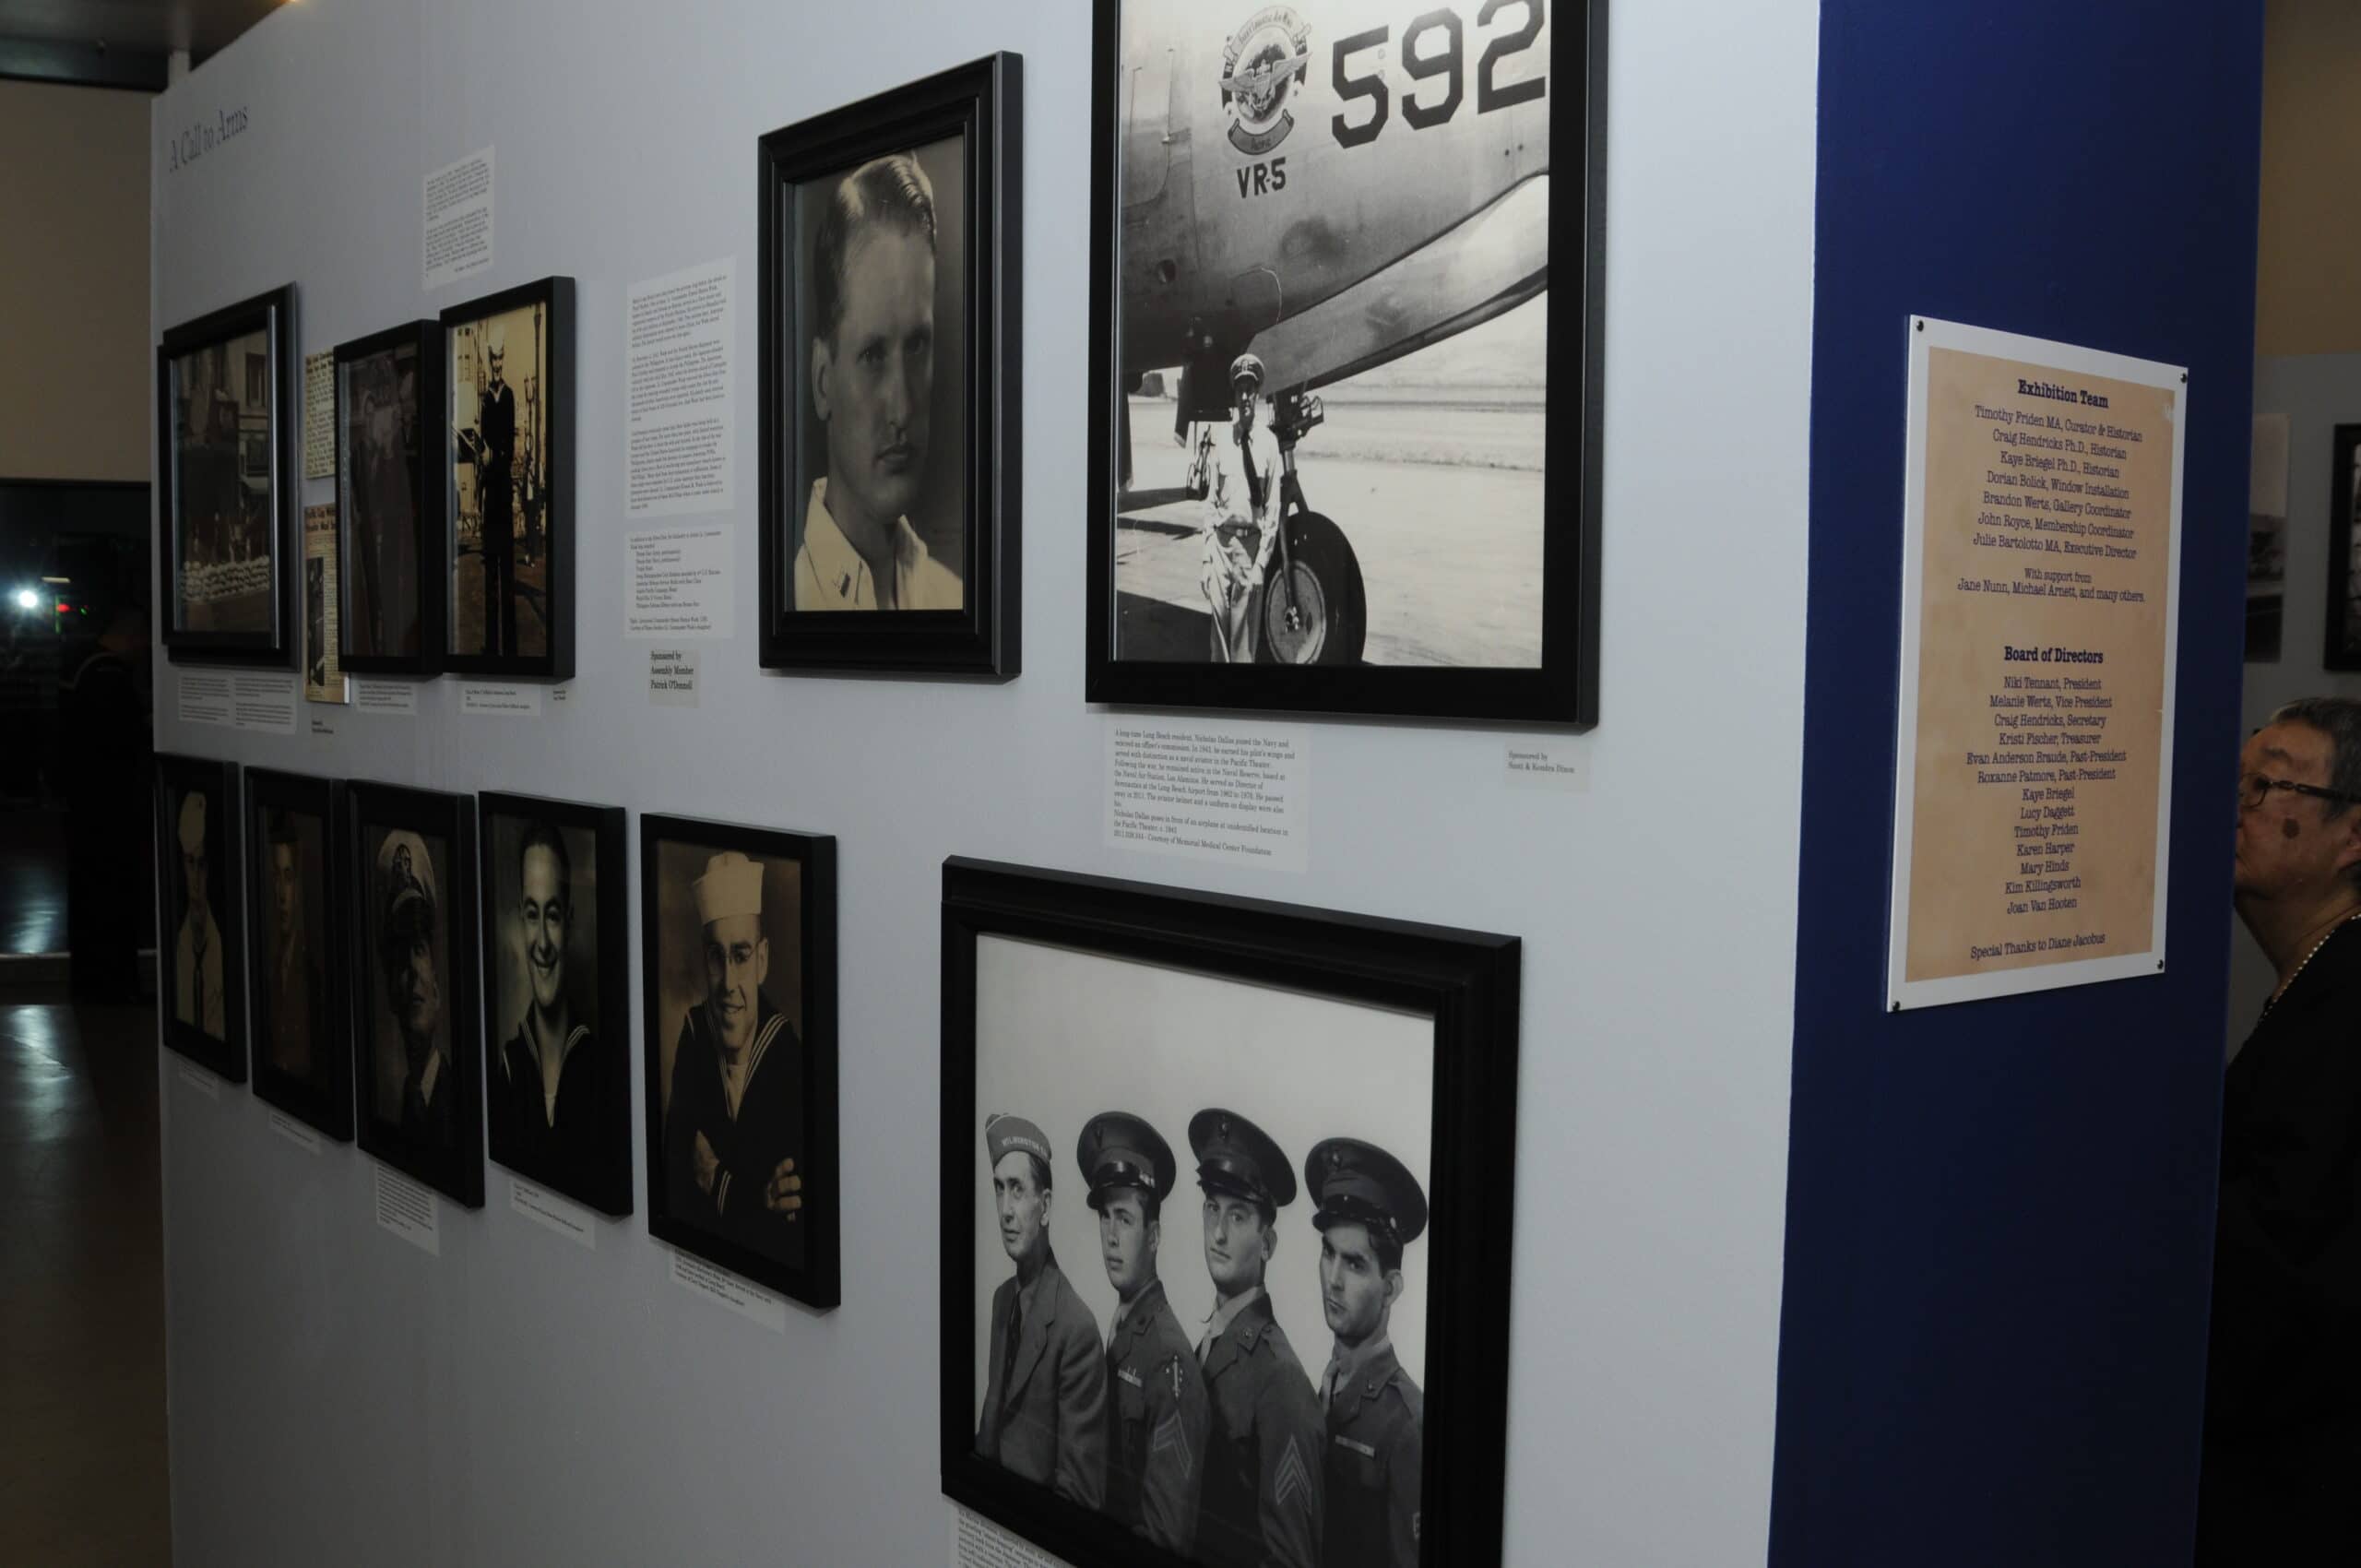 Historical society pearl harbor opening reception portraits and photographs